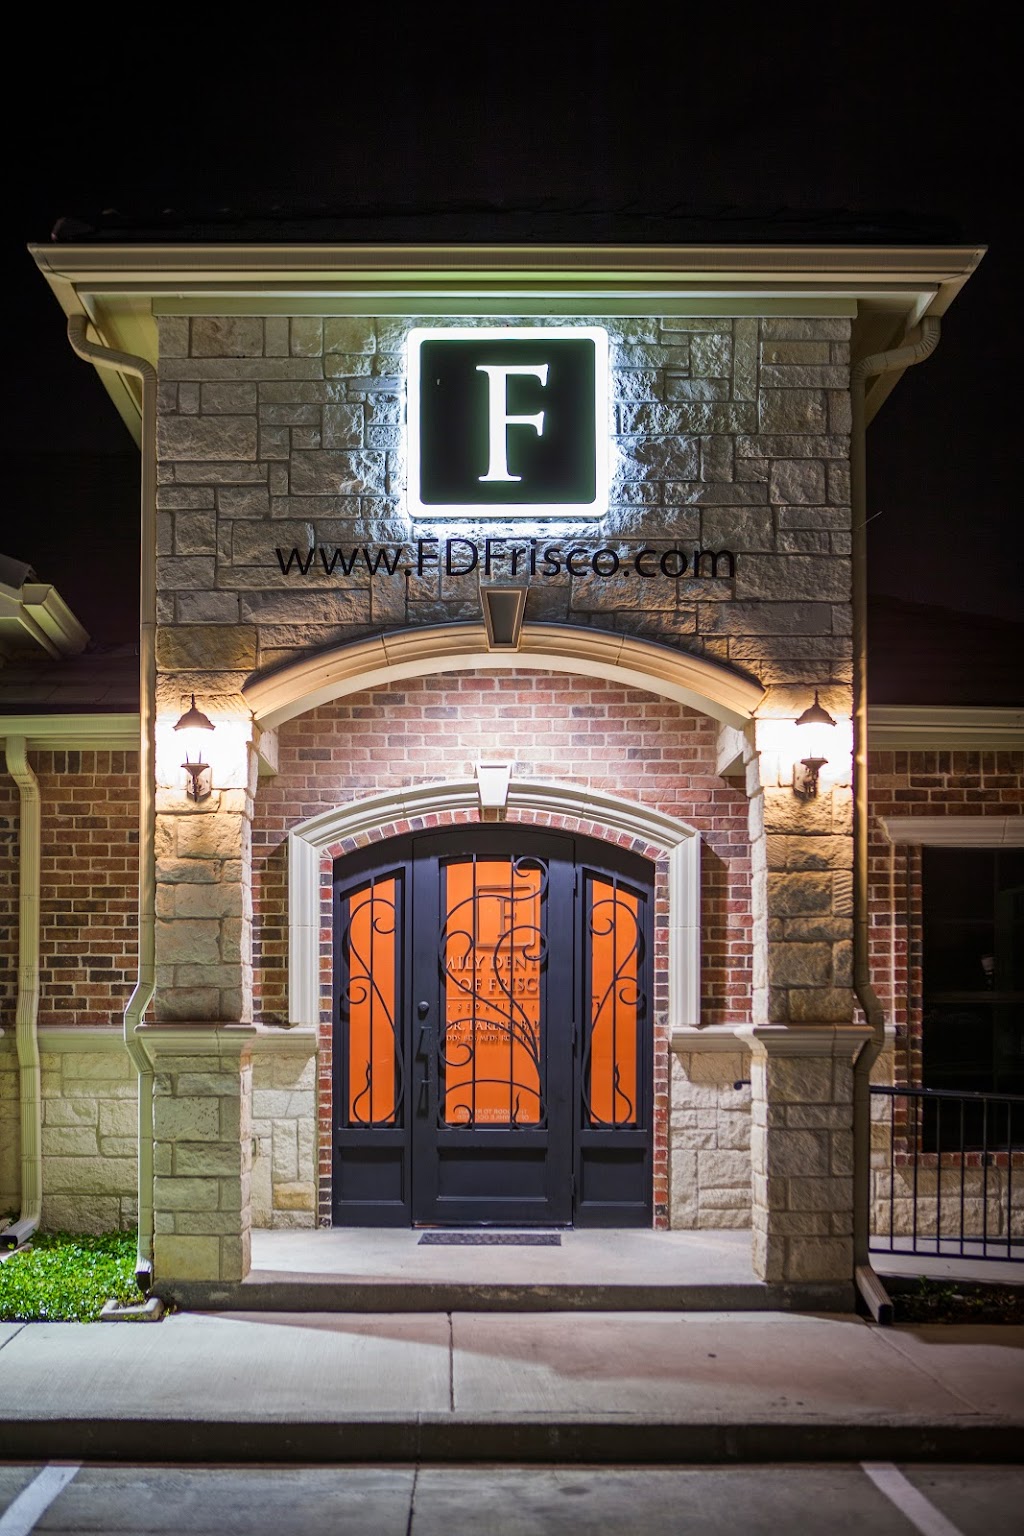 Family Dentistry of Frisco | 11560 Teel Pkwy #200, Frisco, TX 75033, USA | Phone: (469) 362-3150